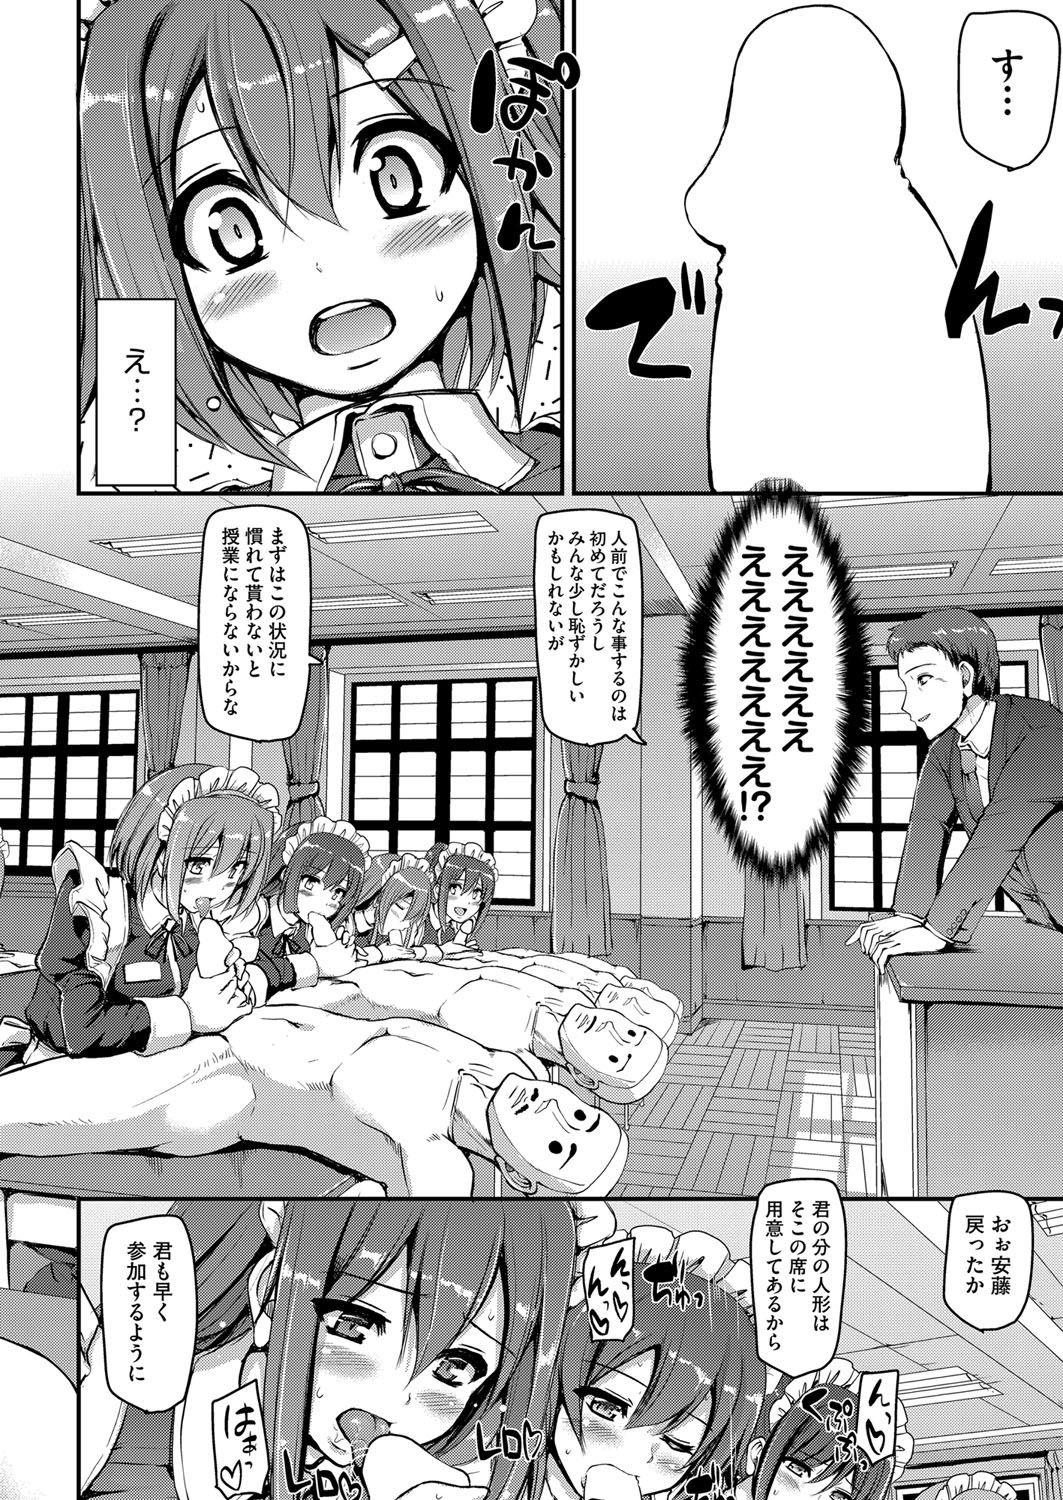 Pigtails Maid Gakuen e Youkoso!! Ch.1-3 Homo - Page 12